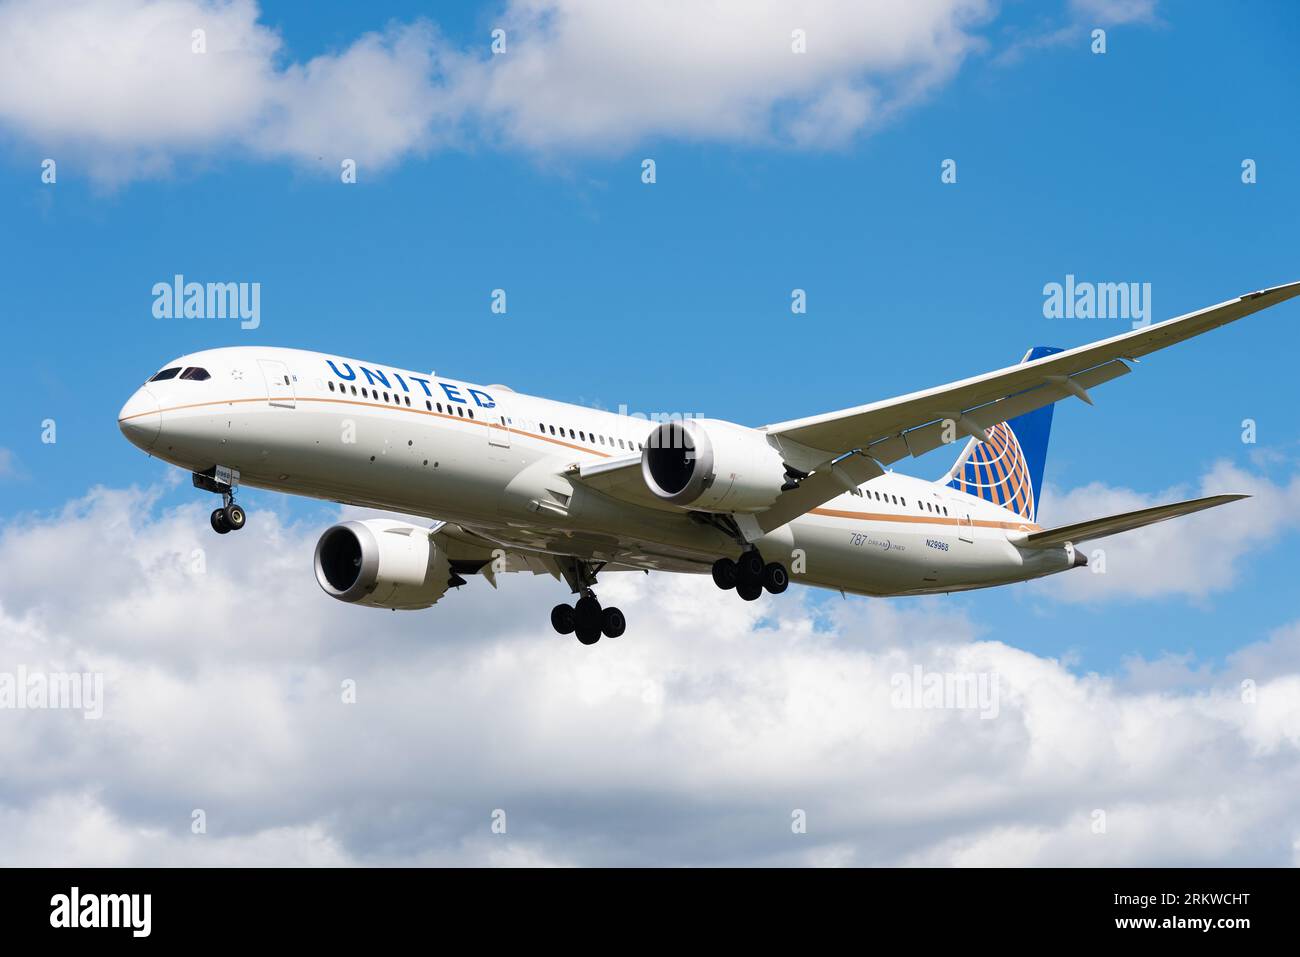 United Airlines Boeing 787-9 Dreamliner jet airliner plane N29968 on finals to land at London Heathrow Airport, UK. Long haul wide body airplane Stock Photo